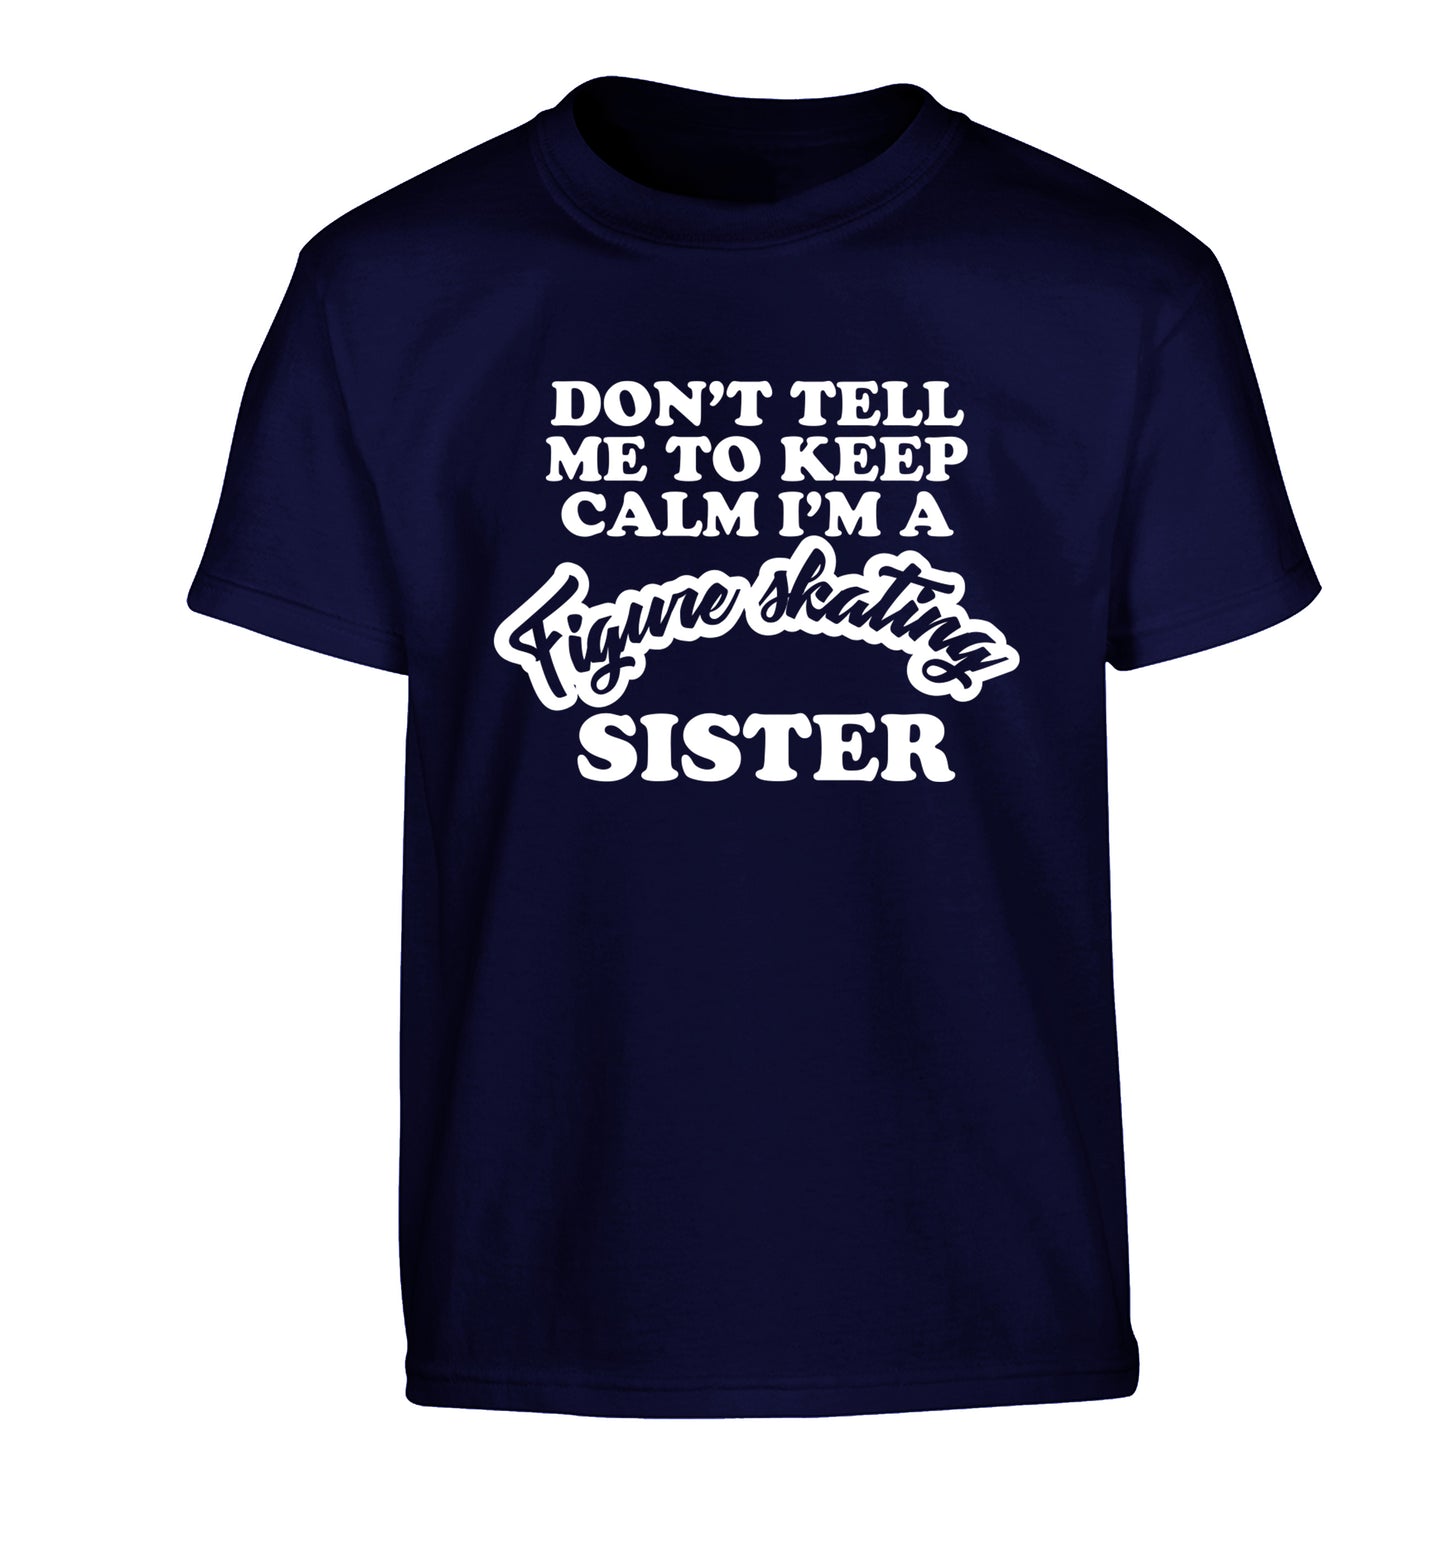 Don't tell me to keep calm I'm a figure skating sister Children's navy Tshirt 12-14 Years